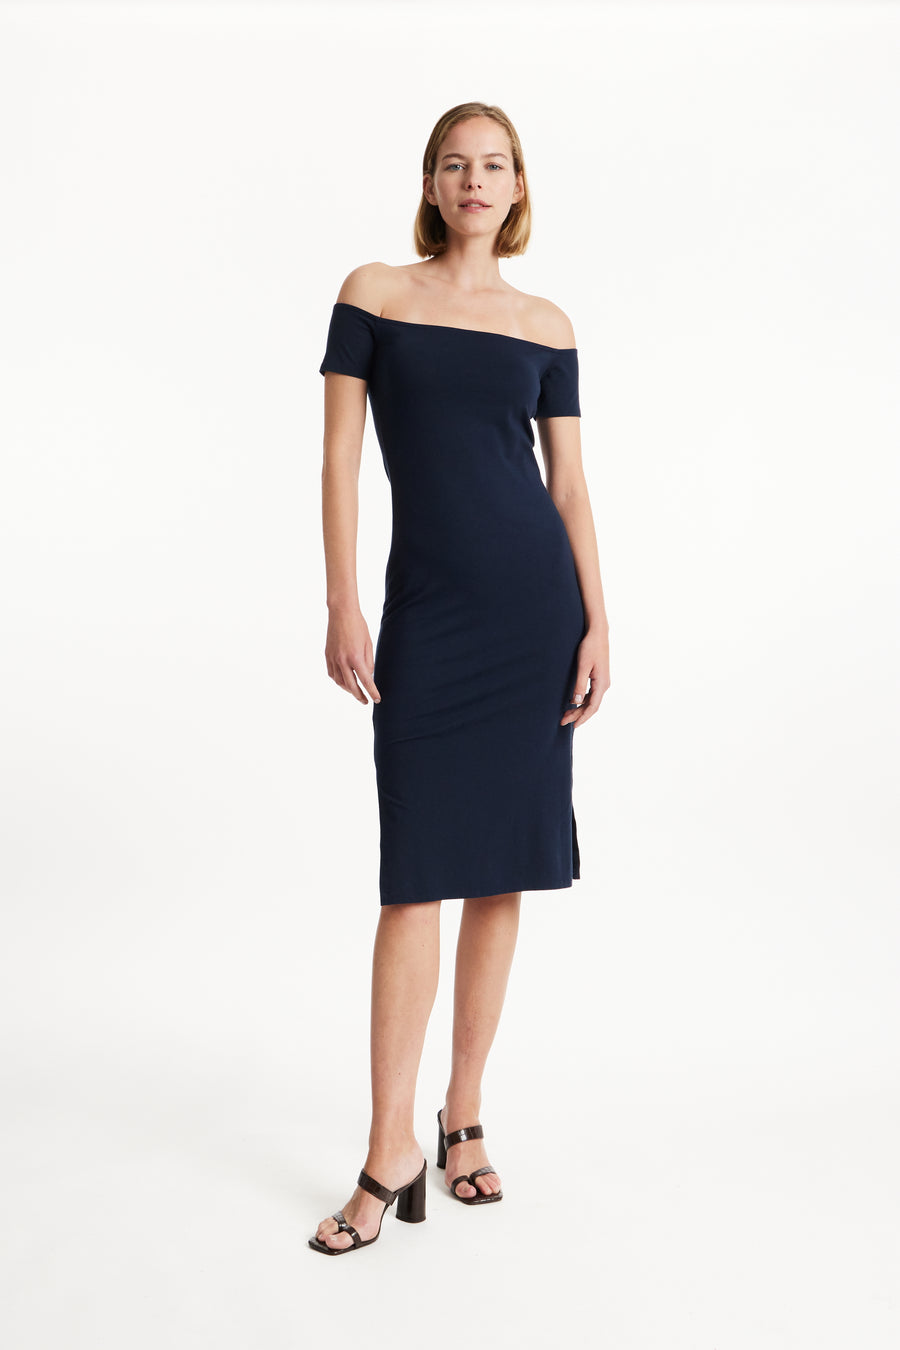 People Tree Fair Trade, Ethical & Sustainable Emer Dress in Navy 95% organic certified cotton, 5% elastane